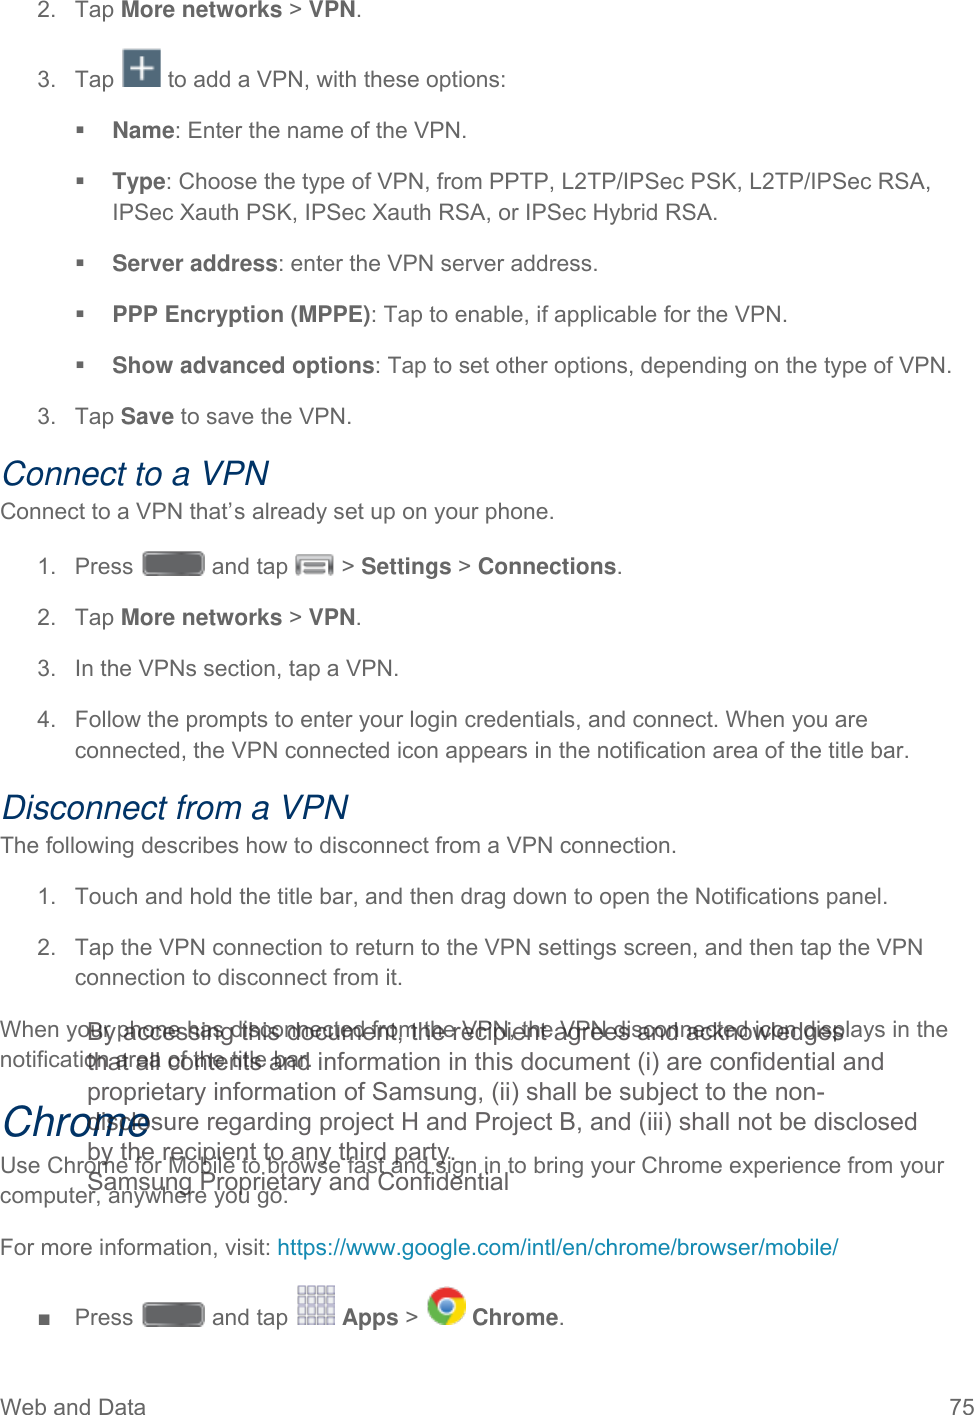  Web and Data 75    Tap More networks &gt; VPN. 2. Tap   to add a VPN, with these options: 3. Name: Enter the name of the VPN.  Type: Choose the type of VPN, from PPTP, L2TP/IPSec PSK, L2TP/IPSec RSA, IPSec Xauth PSK, IPSec Xauth RSA, or IPSec Hybrid RSA.  Server address: enter the VPN server address.  PPP Encryption (MPPE): Tap to enable, if applicable for the VPN.  Show advanced options: Tap to set other options, depending on the type of VPN. 3. Tap Save to save the VPN. Connect to a VPN Connect to a VPN that’s already set up on your phone. 1.  Press   and tap   &gt; Settings &gt; Connections. 2. Tap More networks &gt; VPN. 3. In the VPNs section, tap a VPN. 4. Follow the prompts to enter your login credentials, and connect. When you are connected, the VPN connected icon appears in the notification area of the title bar. Disconnect from a VPN The following describes how to disconnect from a VPN connection. 1. Touch and hold the title bar, and then drag down to open the Notifications panel. 2. Tap the VPN connection to return to the VPN settings screen, and then tap the VPN connection to disconnect from it.  When your phone has disconnected from the VPN, the VPN disconnected icon displays in the notification area of the title bar. Chrome Use Chrome for Mobile to browse fast and sign in to bring your Chrome experience from your computer, anywhere you go. For more information, visit: https://www.google.com/intl/en/chrome/browser/mobile/ ■  Press   and tap   Apps &gt;   Chrome. By accessing this document, the recipient agrees and acknowledges that all contents and information in this document (i) are confidential and proprietary information of Samsung, (ii) shall be subject to the non- disclosure regarding project H and Project B, and (iii) shall not be disclosed by the recipient to any third party. Samsung Proprietary and Confidential 